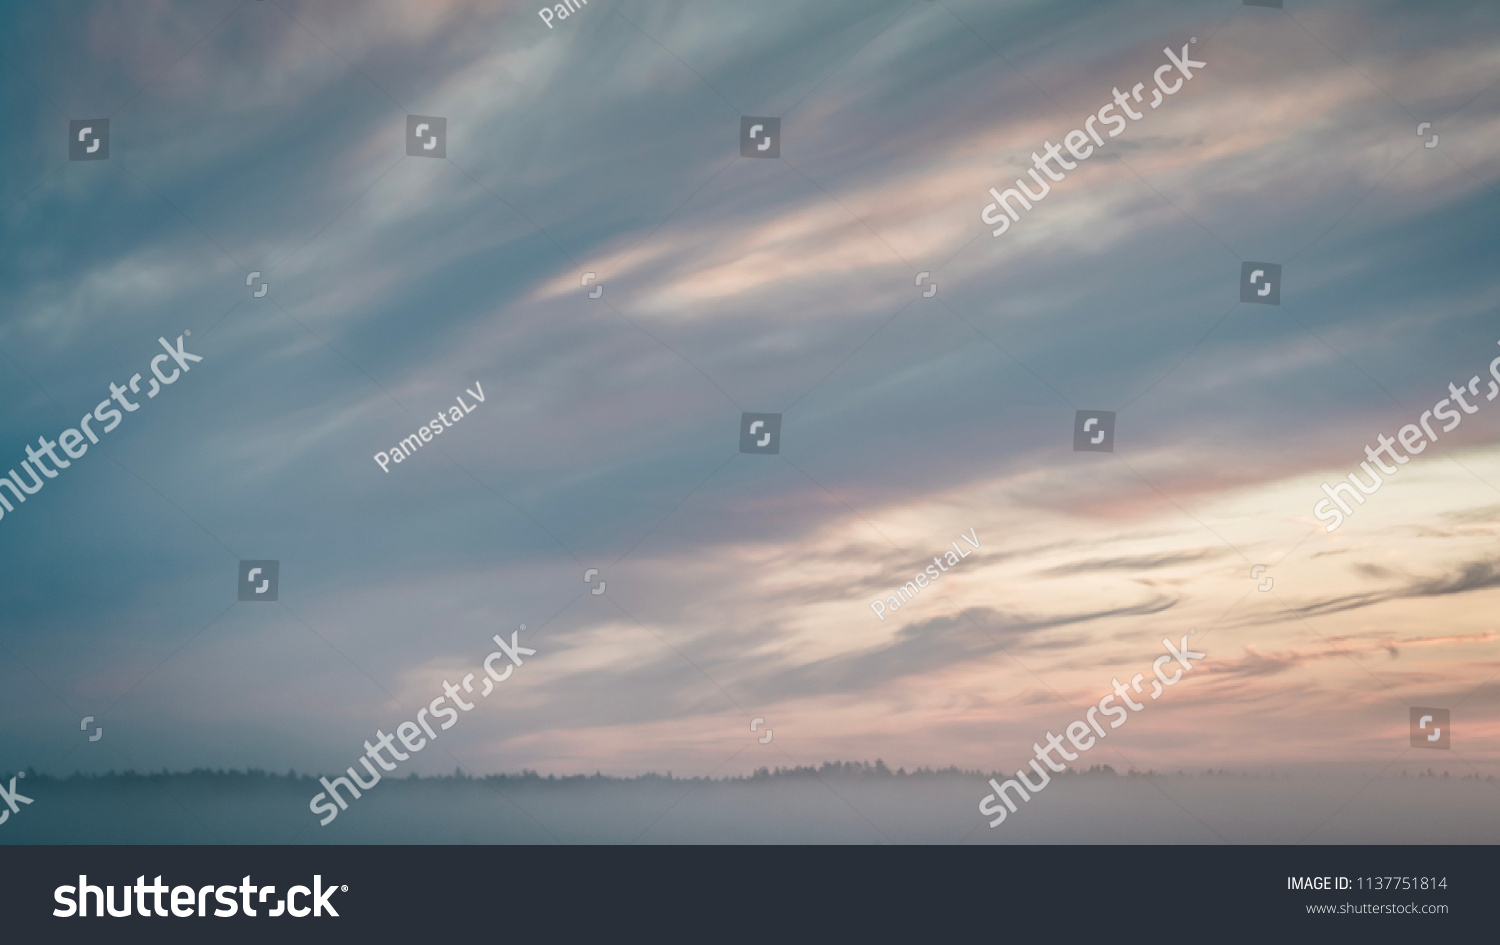 sky morning colors for background #1137751814